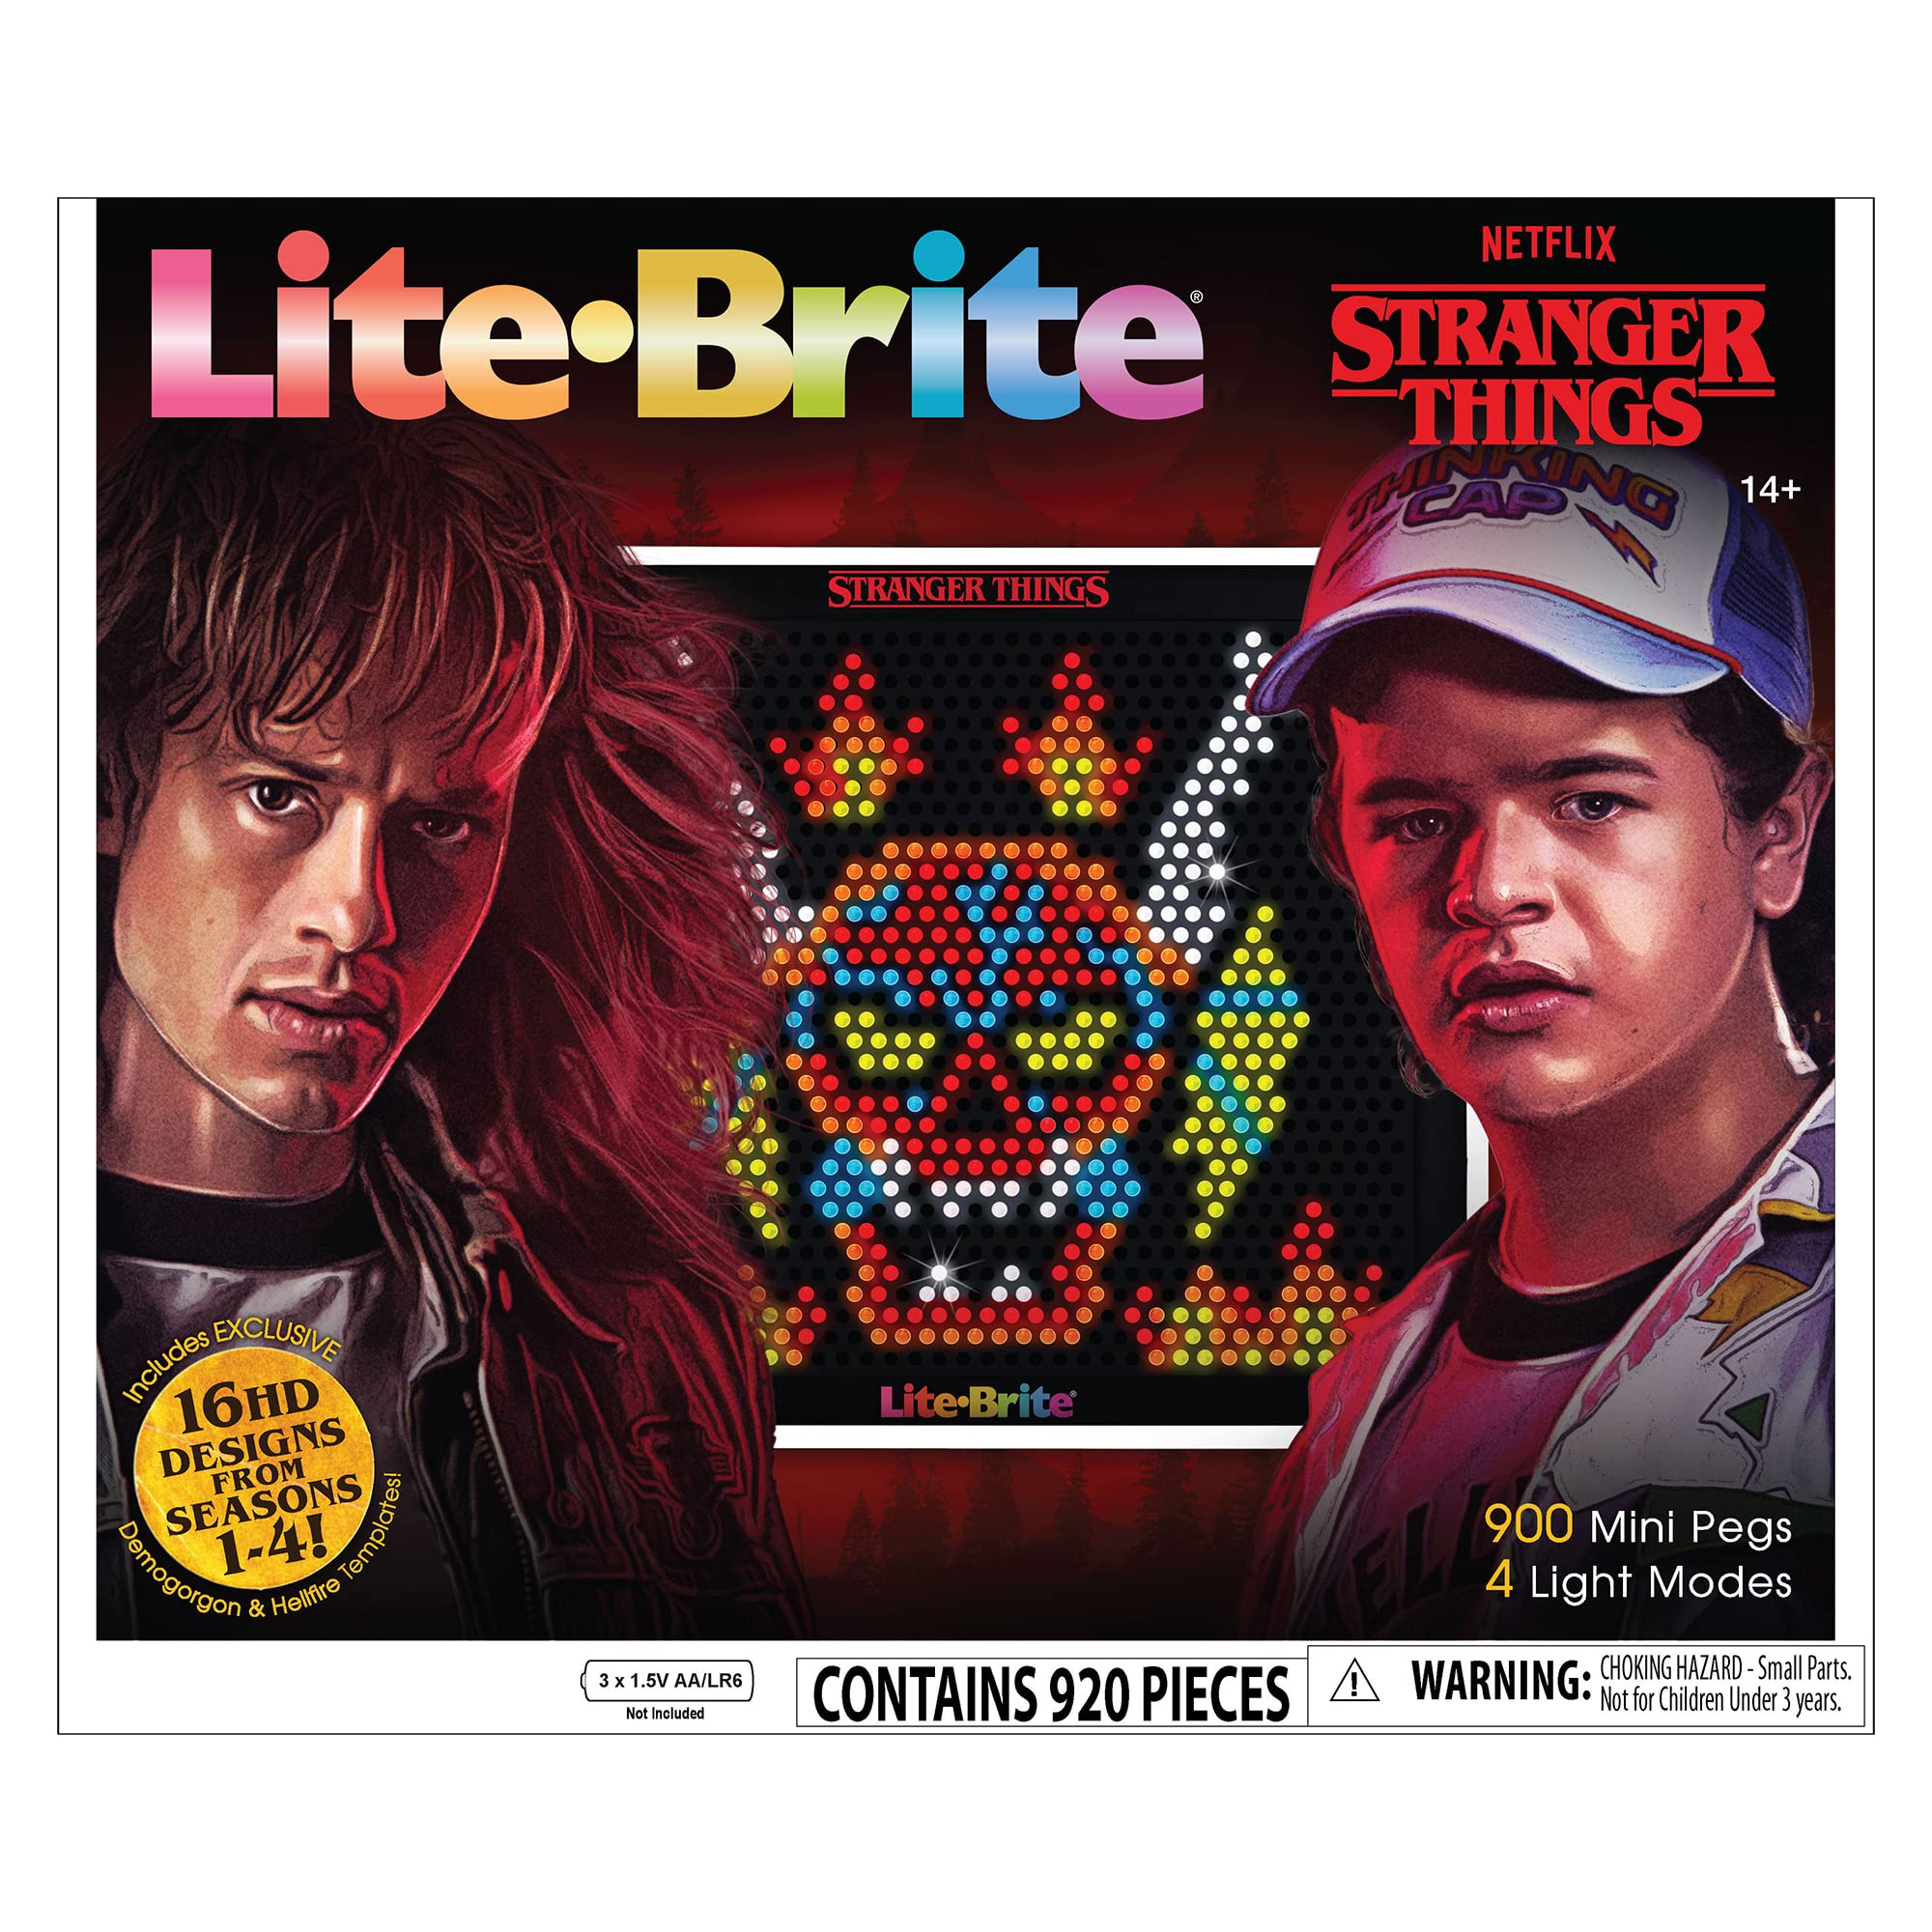 Lite-Brite Stranger Things Special Edition - Demogorgon Hunters - Amazon Exclusive - High-Definition Grid, 16 HD Templates, 900 Mini Pegs, Stickers, Branded Storage Pouch, Ages 14+